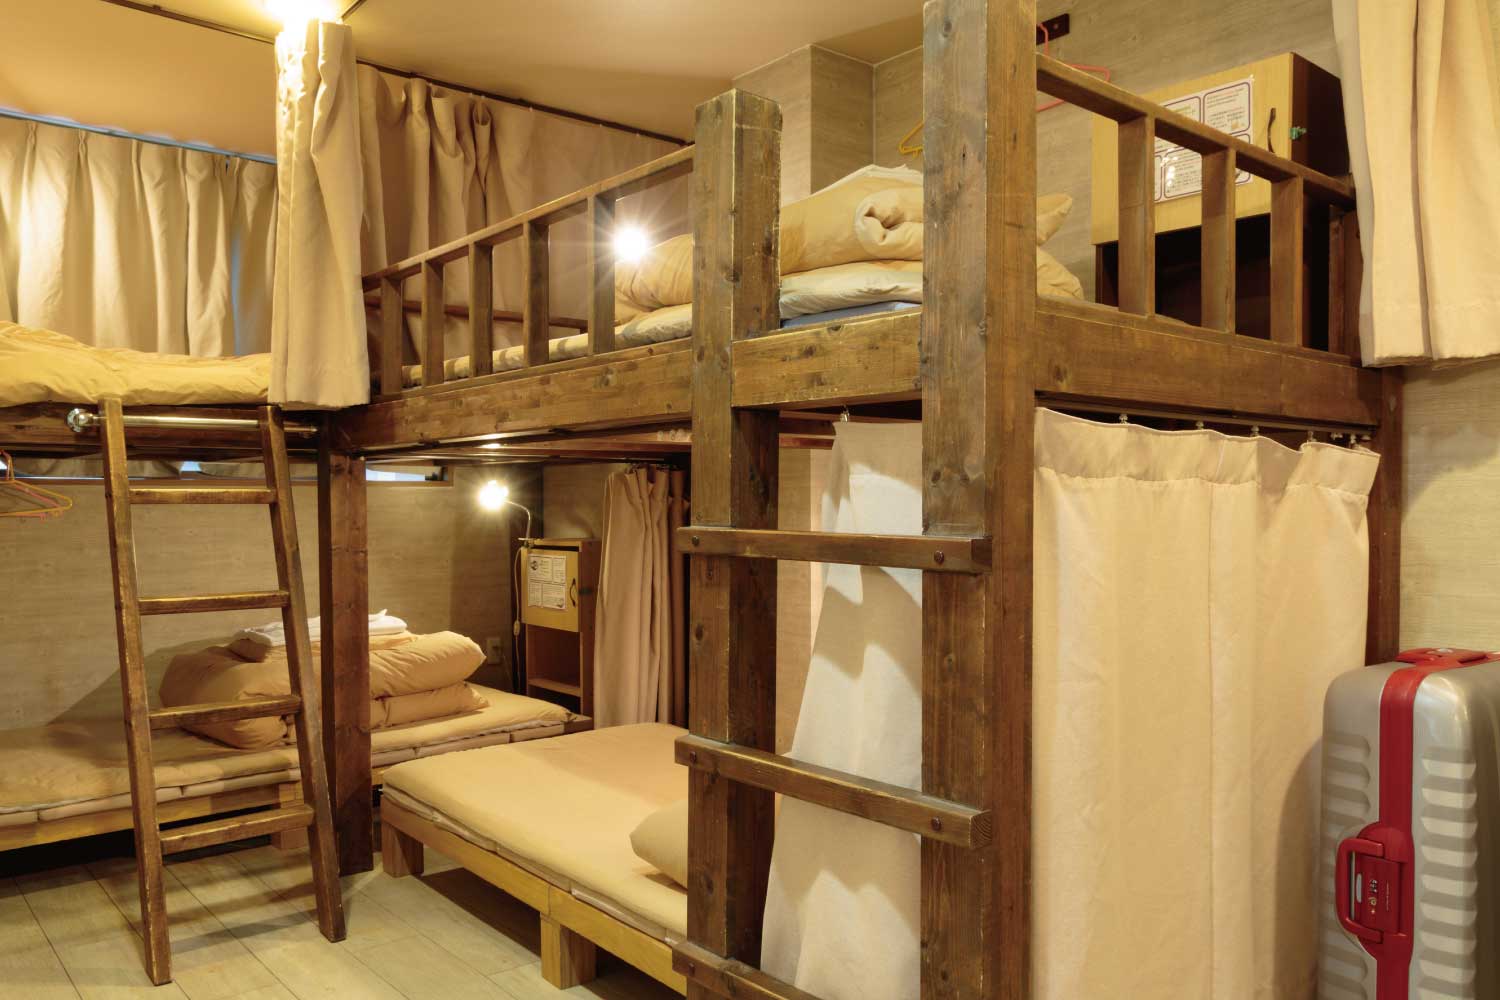 6 Bed Female Dormitory